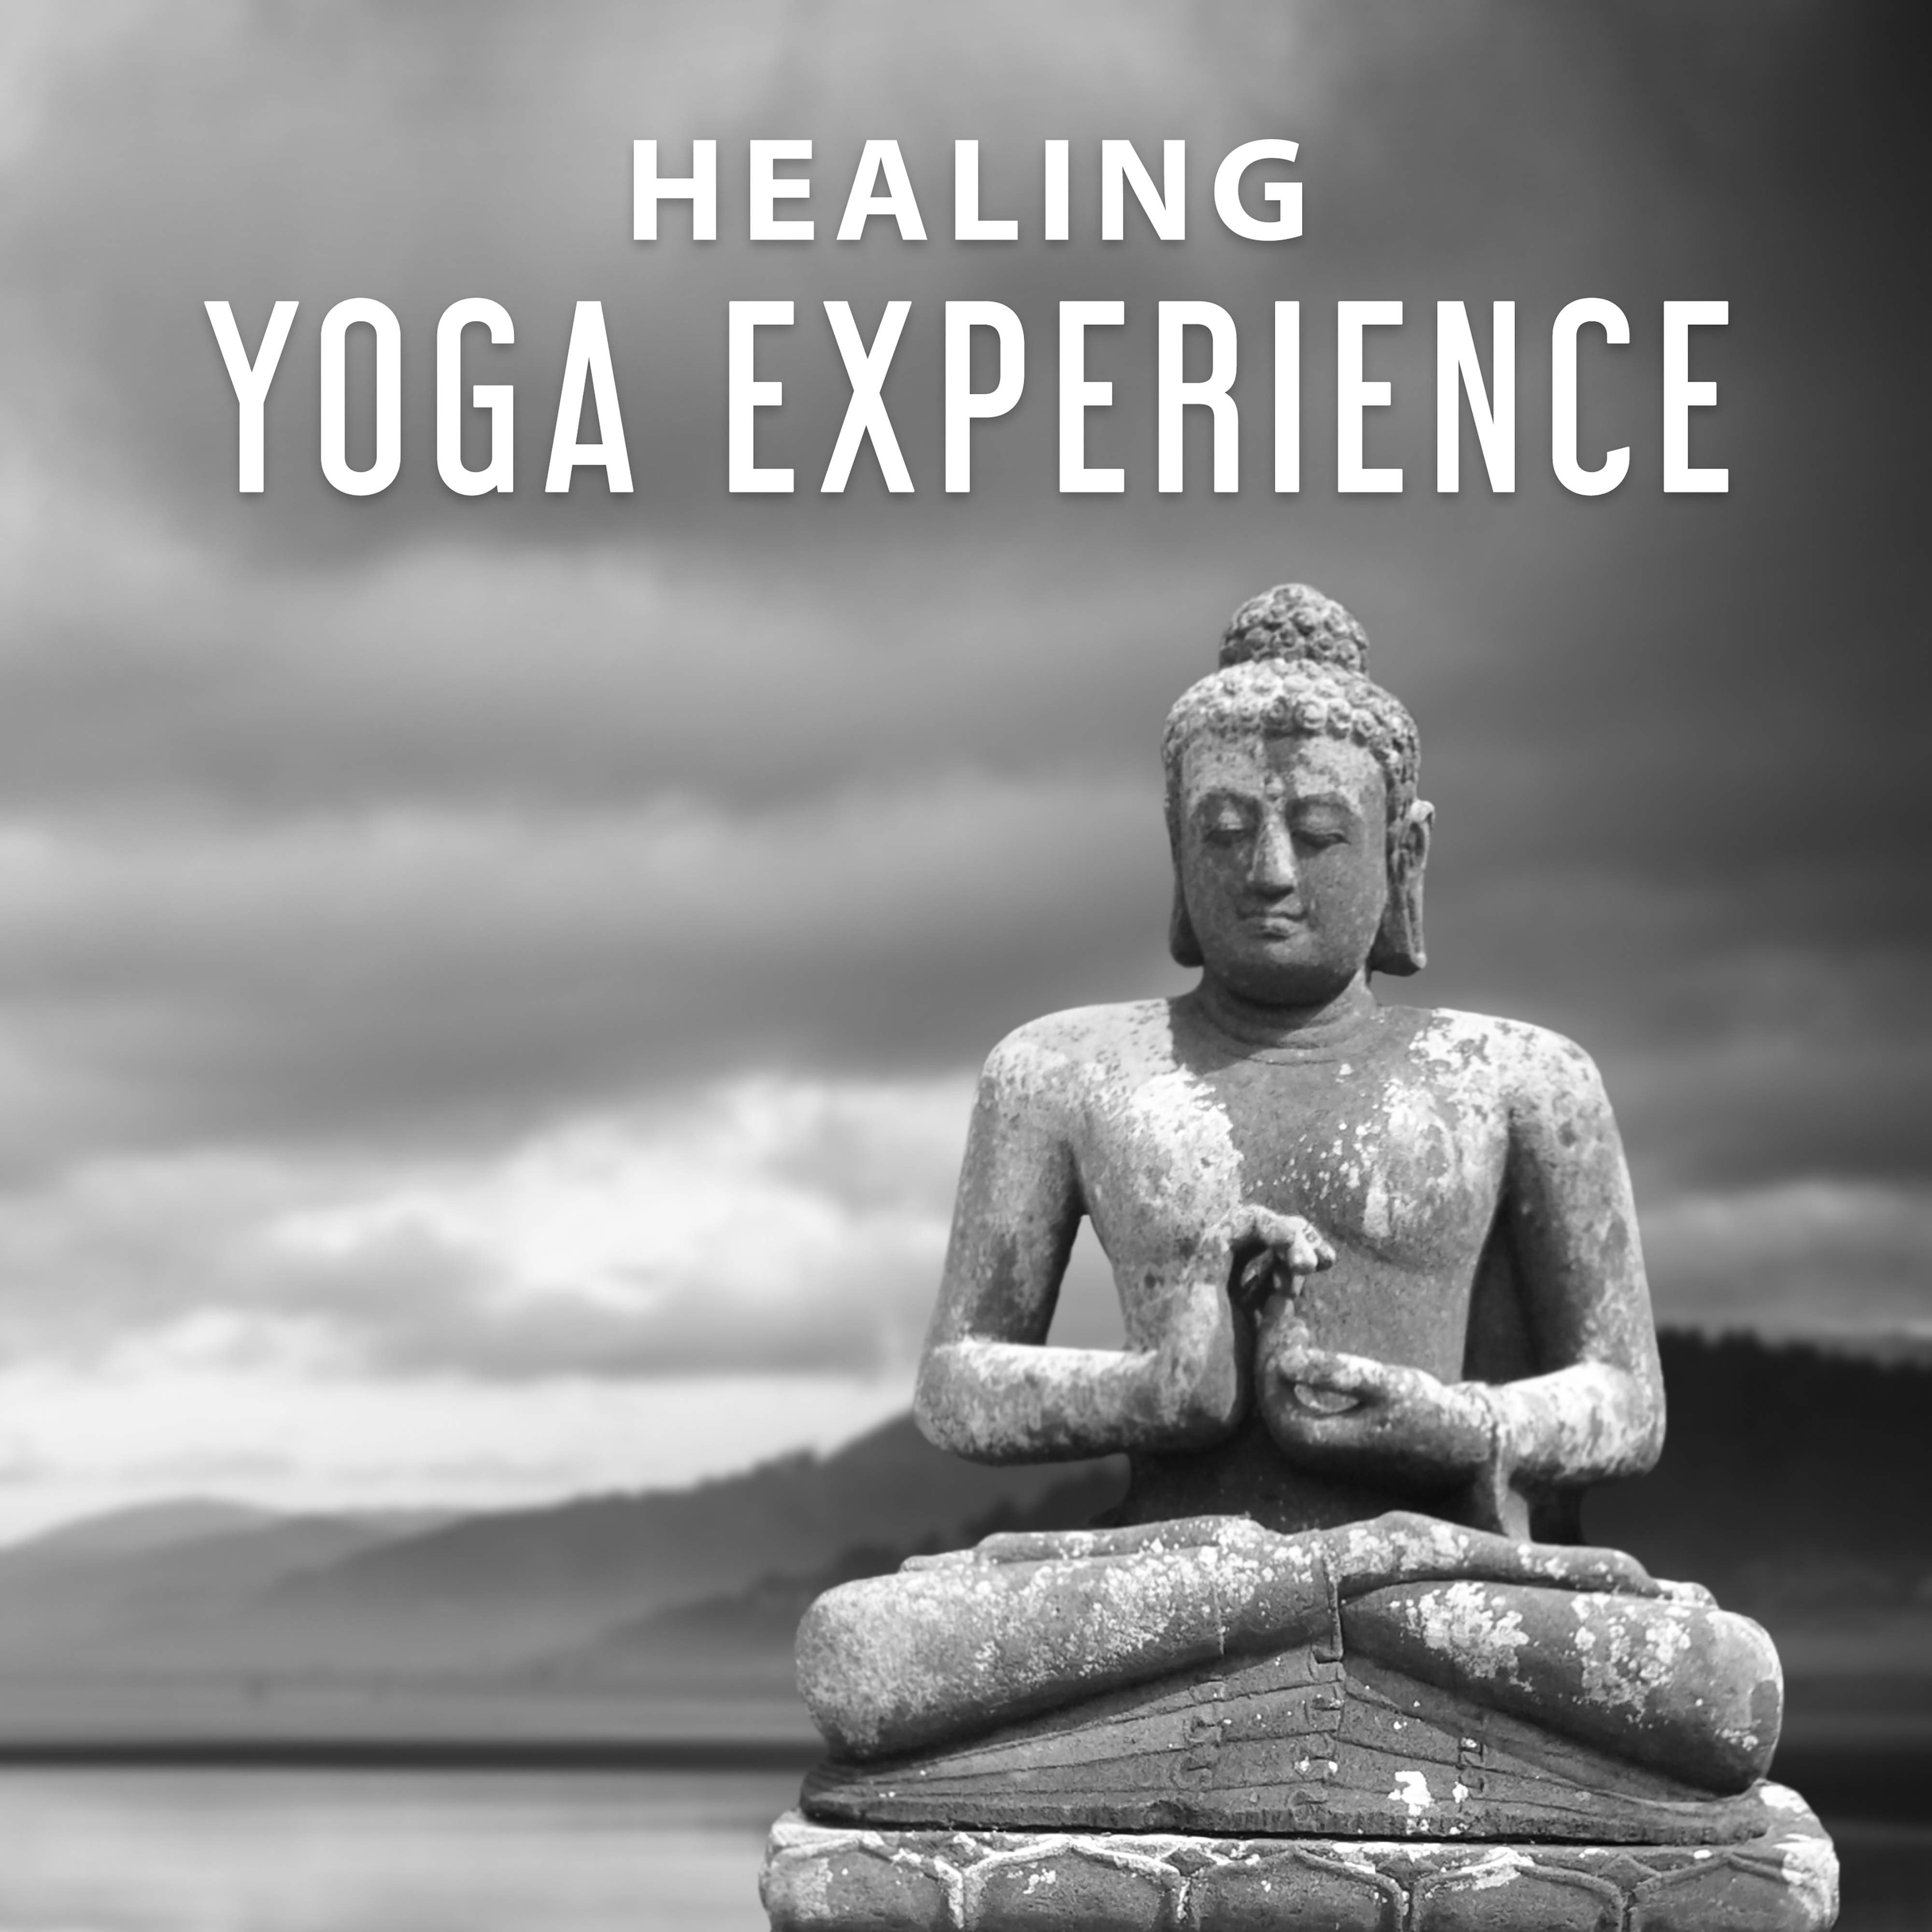 Healing Yoga Experience  Yoga for Healing, Clear Your Mind, Soothe Your Soul, Kundalini Healing